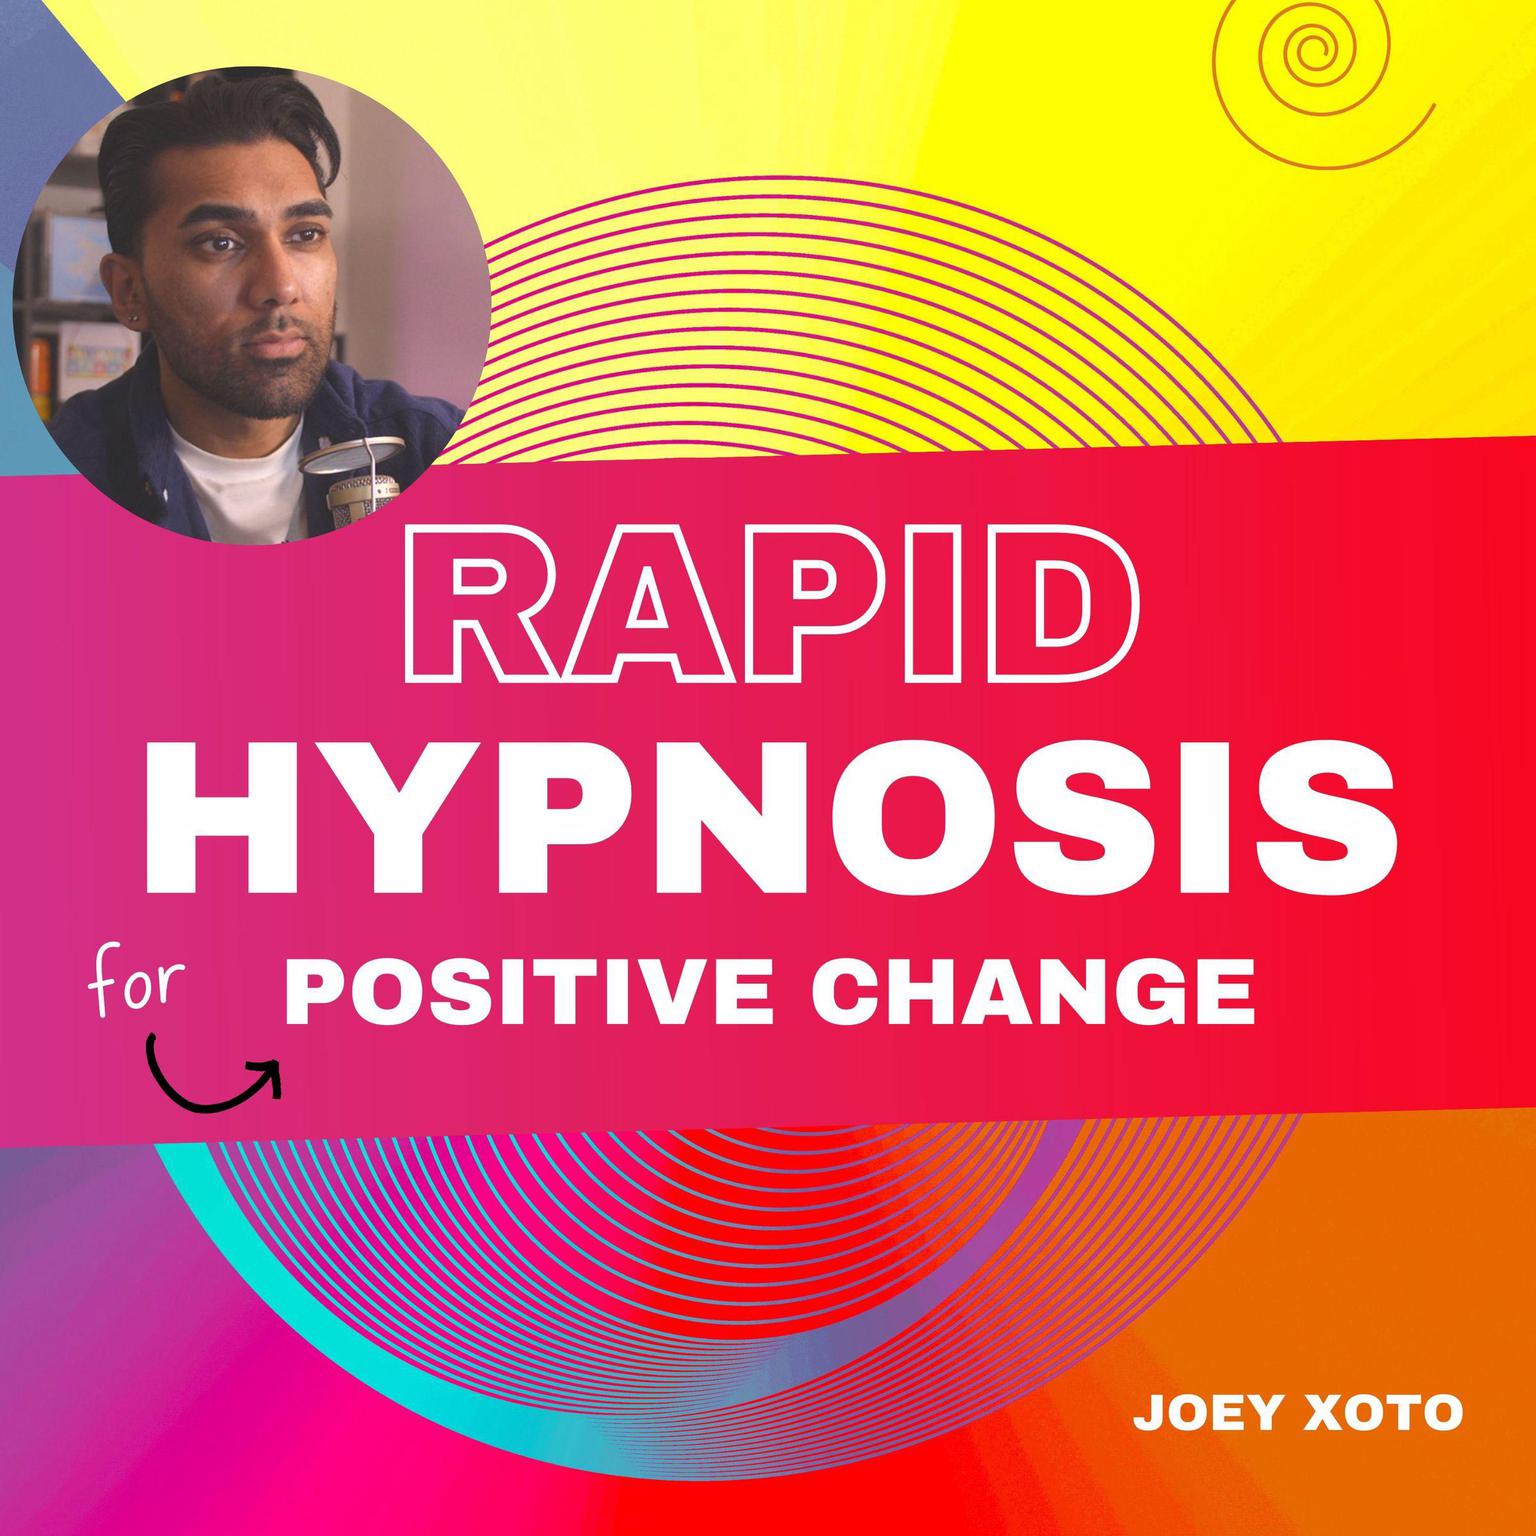 Rapid Hypnosis For Positive Change Audiobook, by Joey Xoto